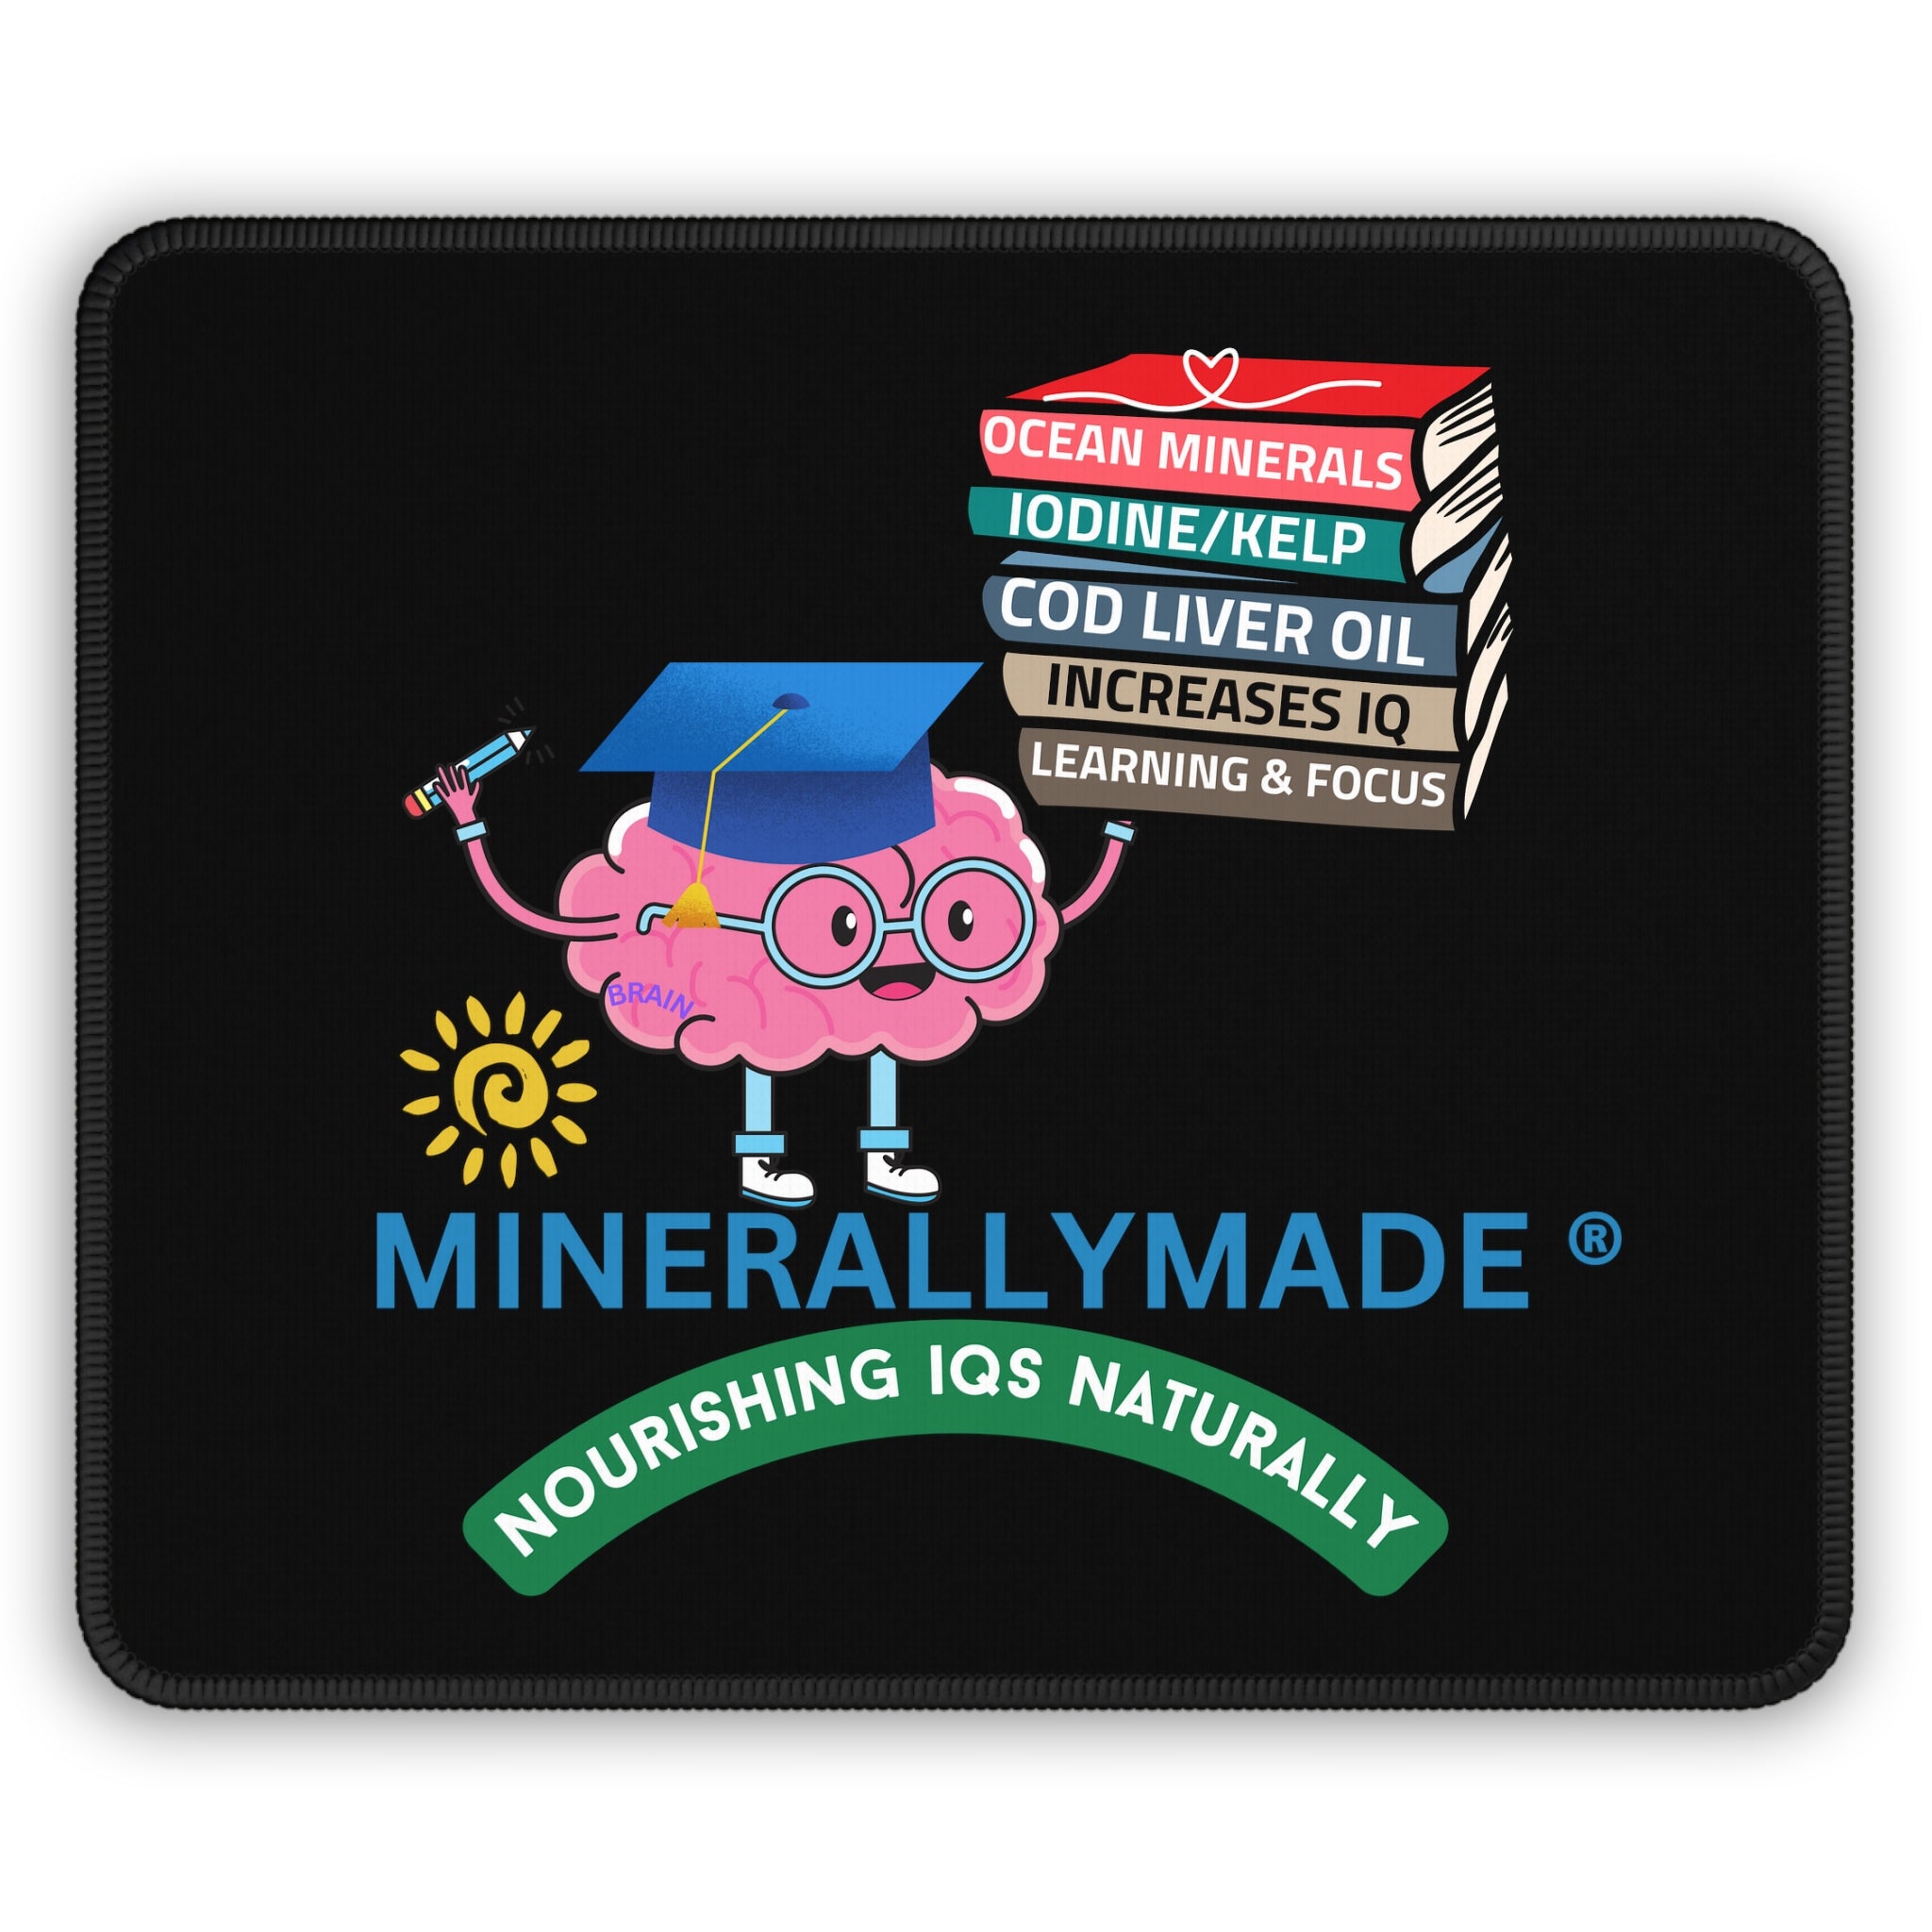 Minerallymade | Nourishing IQs Naturally | Gaming Mouse Pad